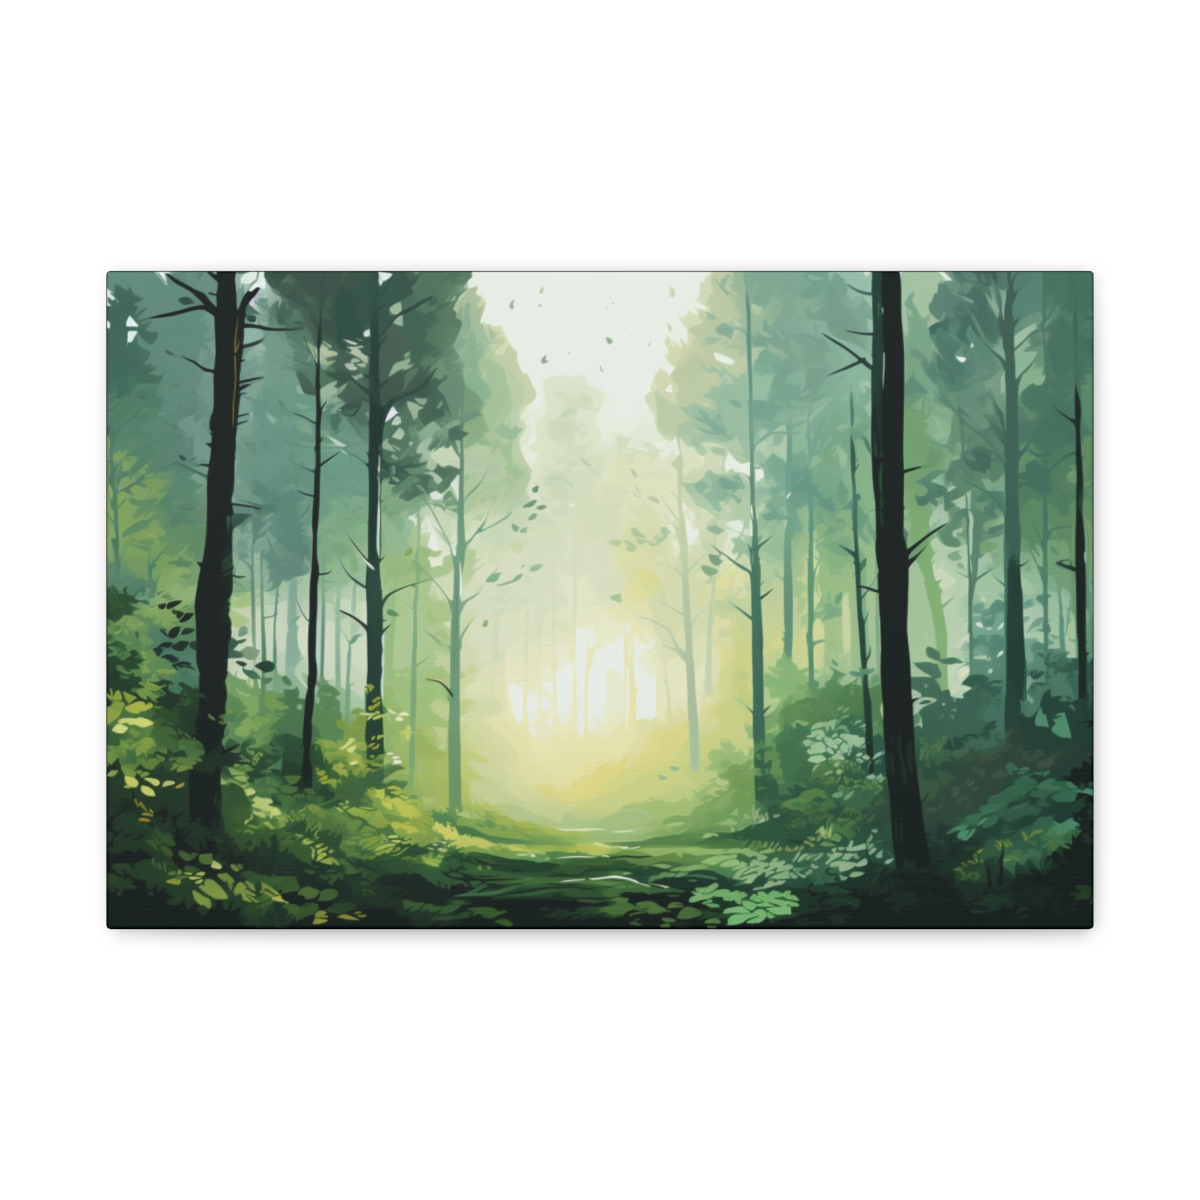 Forest Art Canvas Print: Solitude Among Trees